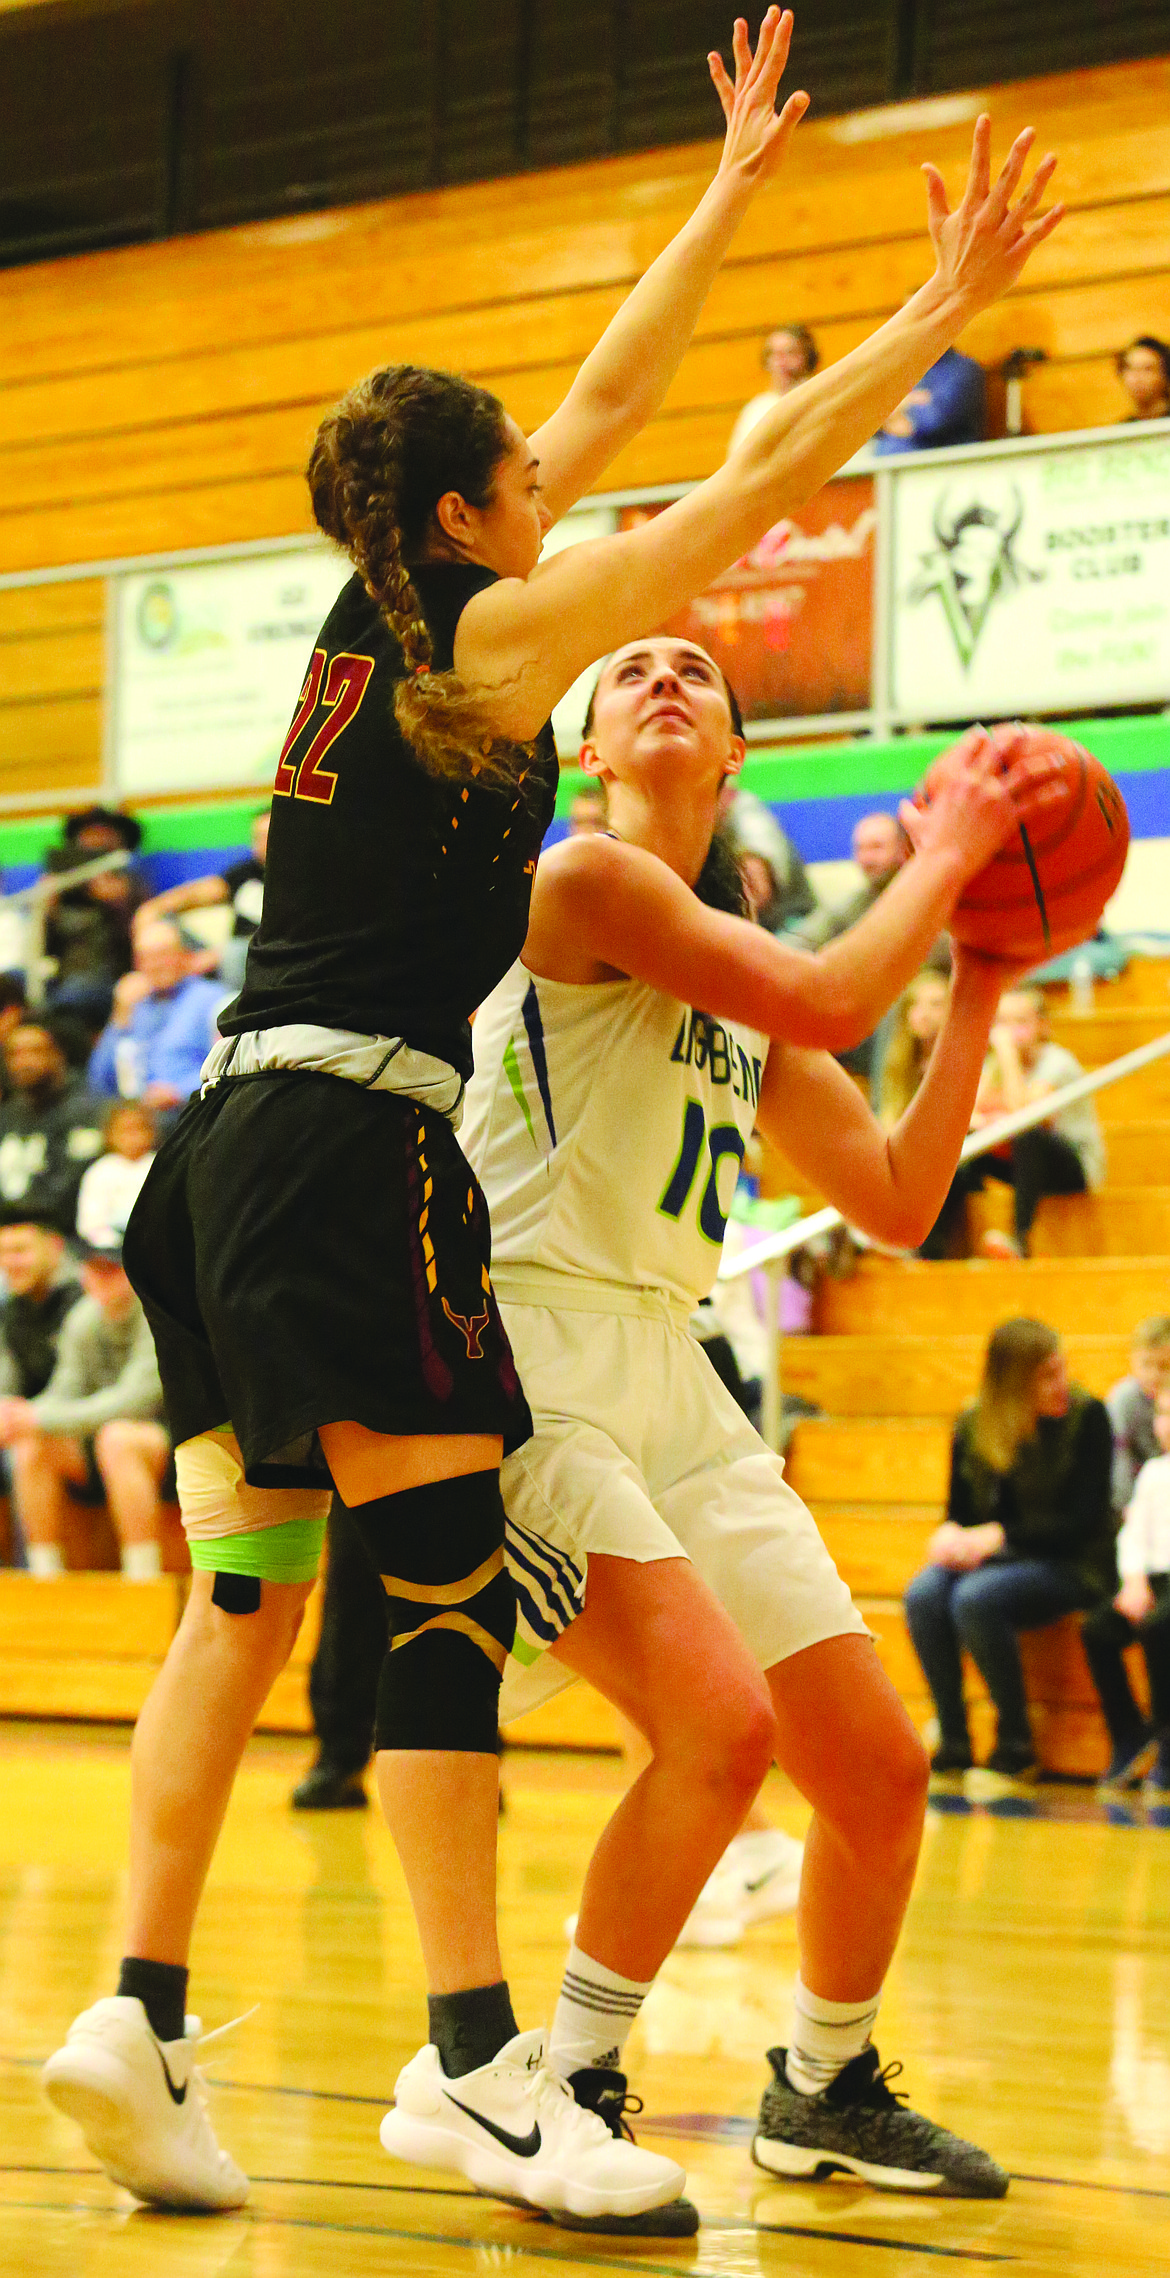 Connor Vanderweyst/Columbia Basin Herald
Big Bend forward Leah Dougherty (10) is guarded by Yakima Valley&#146;s Kamri Von Oelhoffen in the second half Wednesday at DeVries Activity Center.